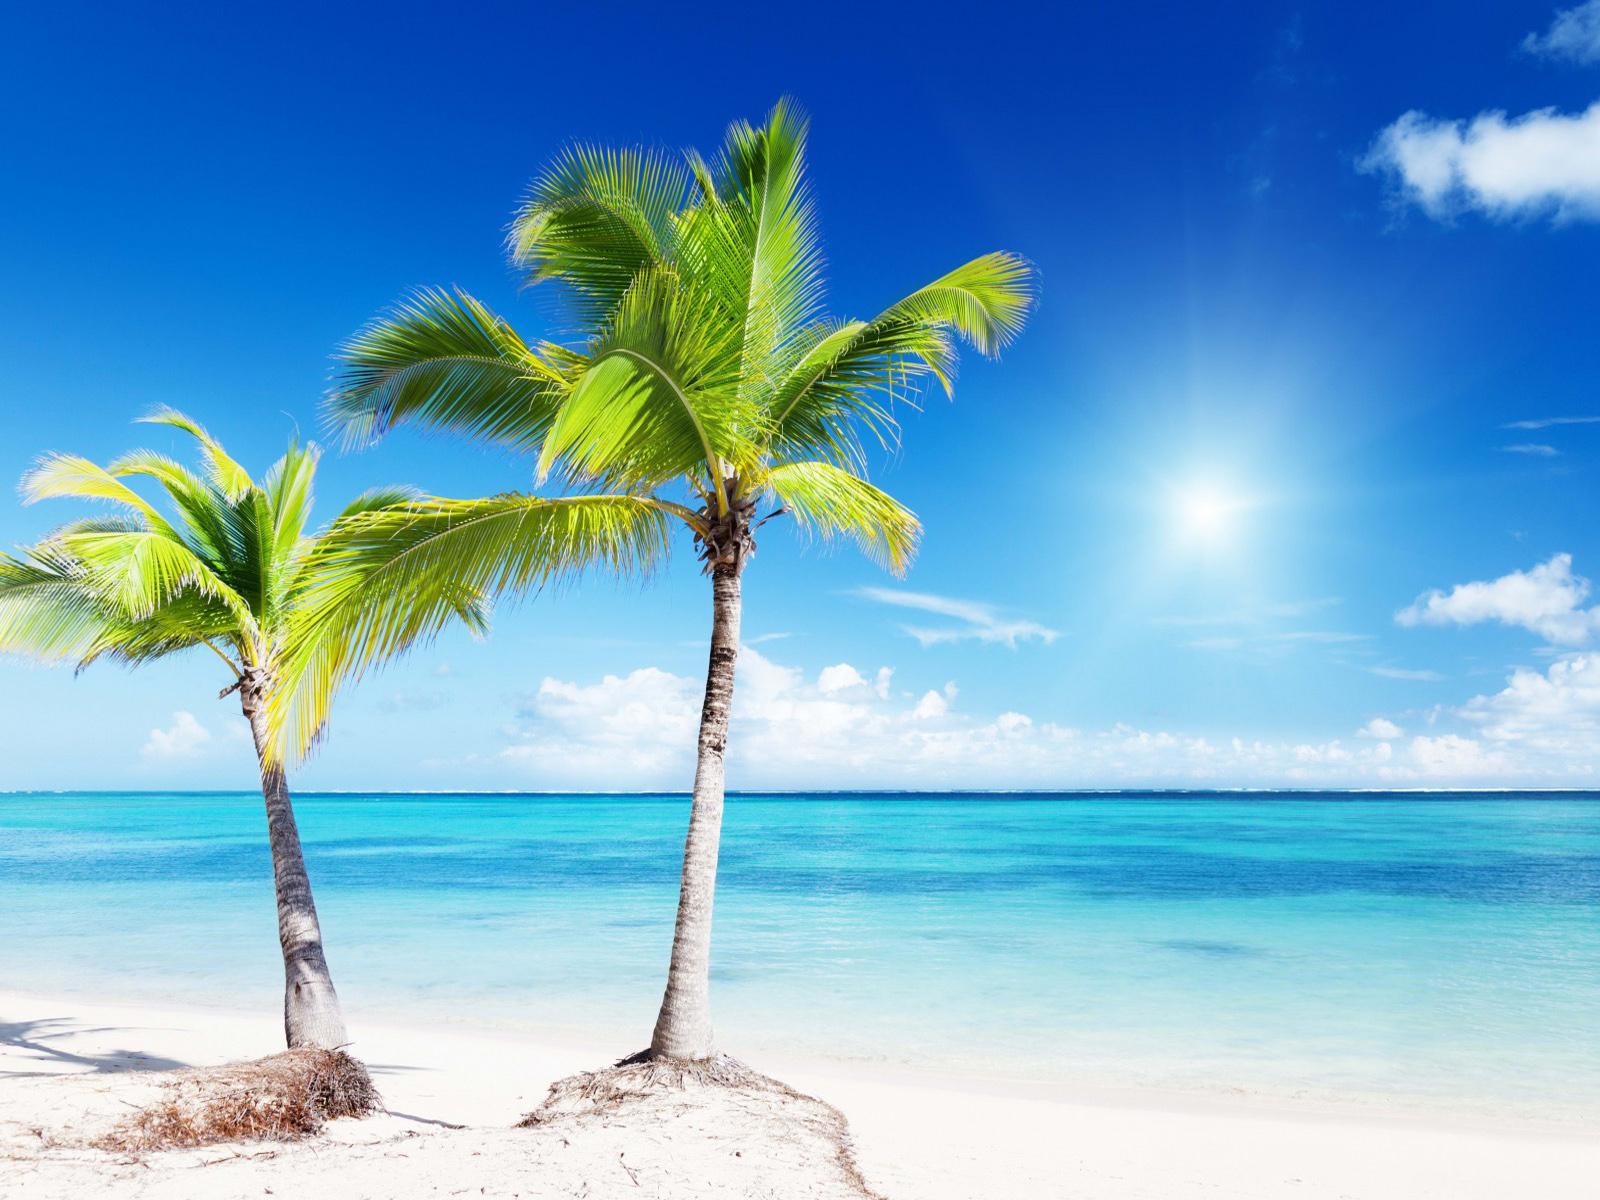 Background For Gt Tropical Beaches With Palm Trees Wallpaper